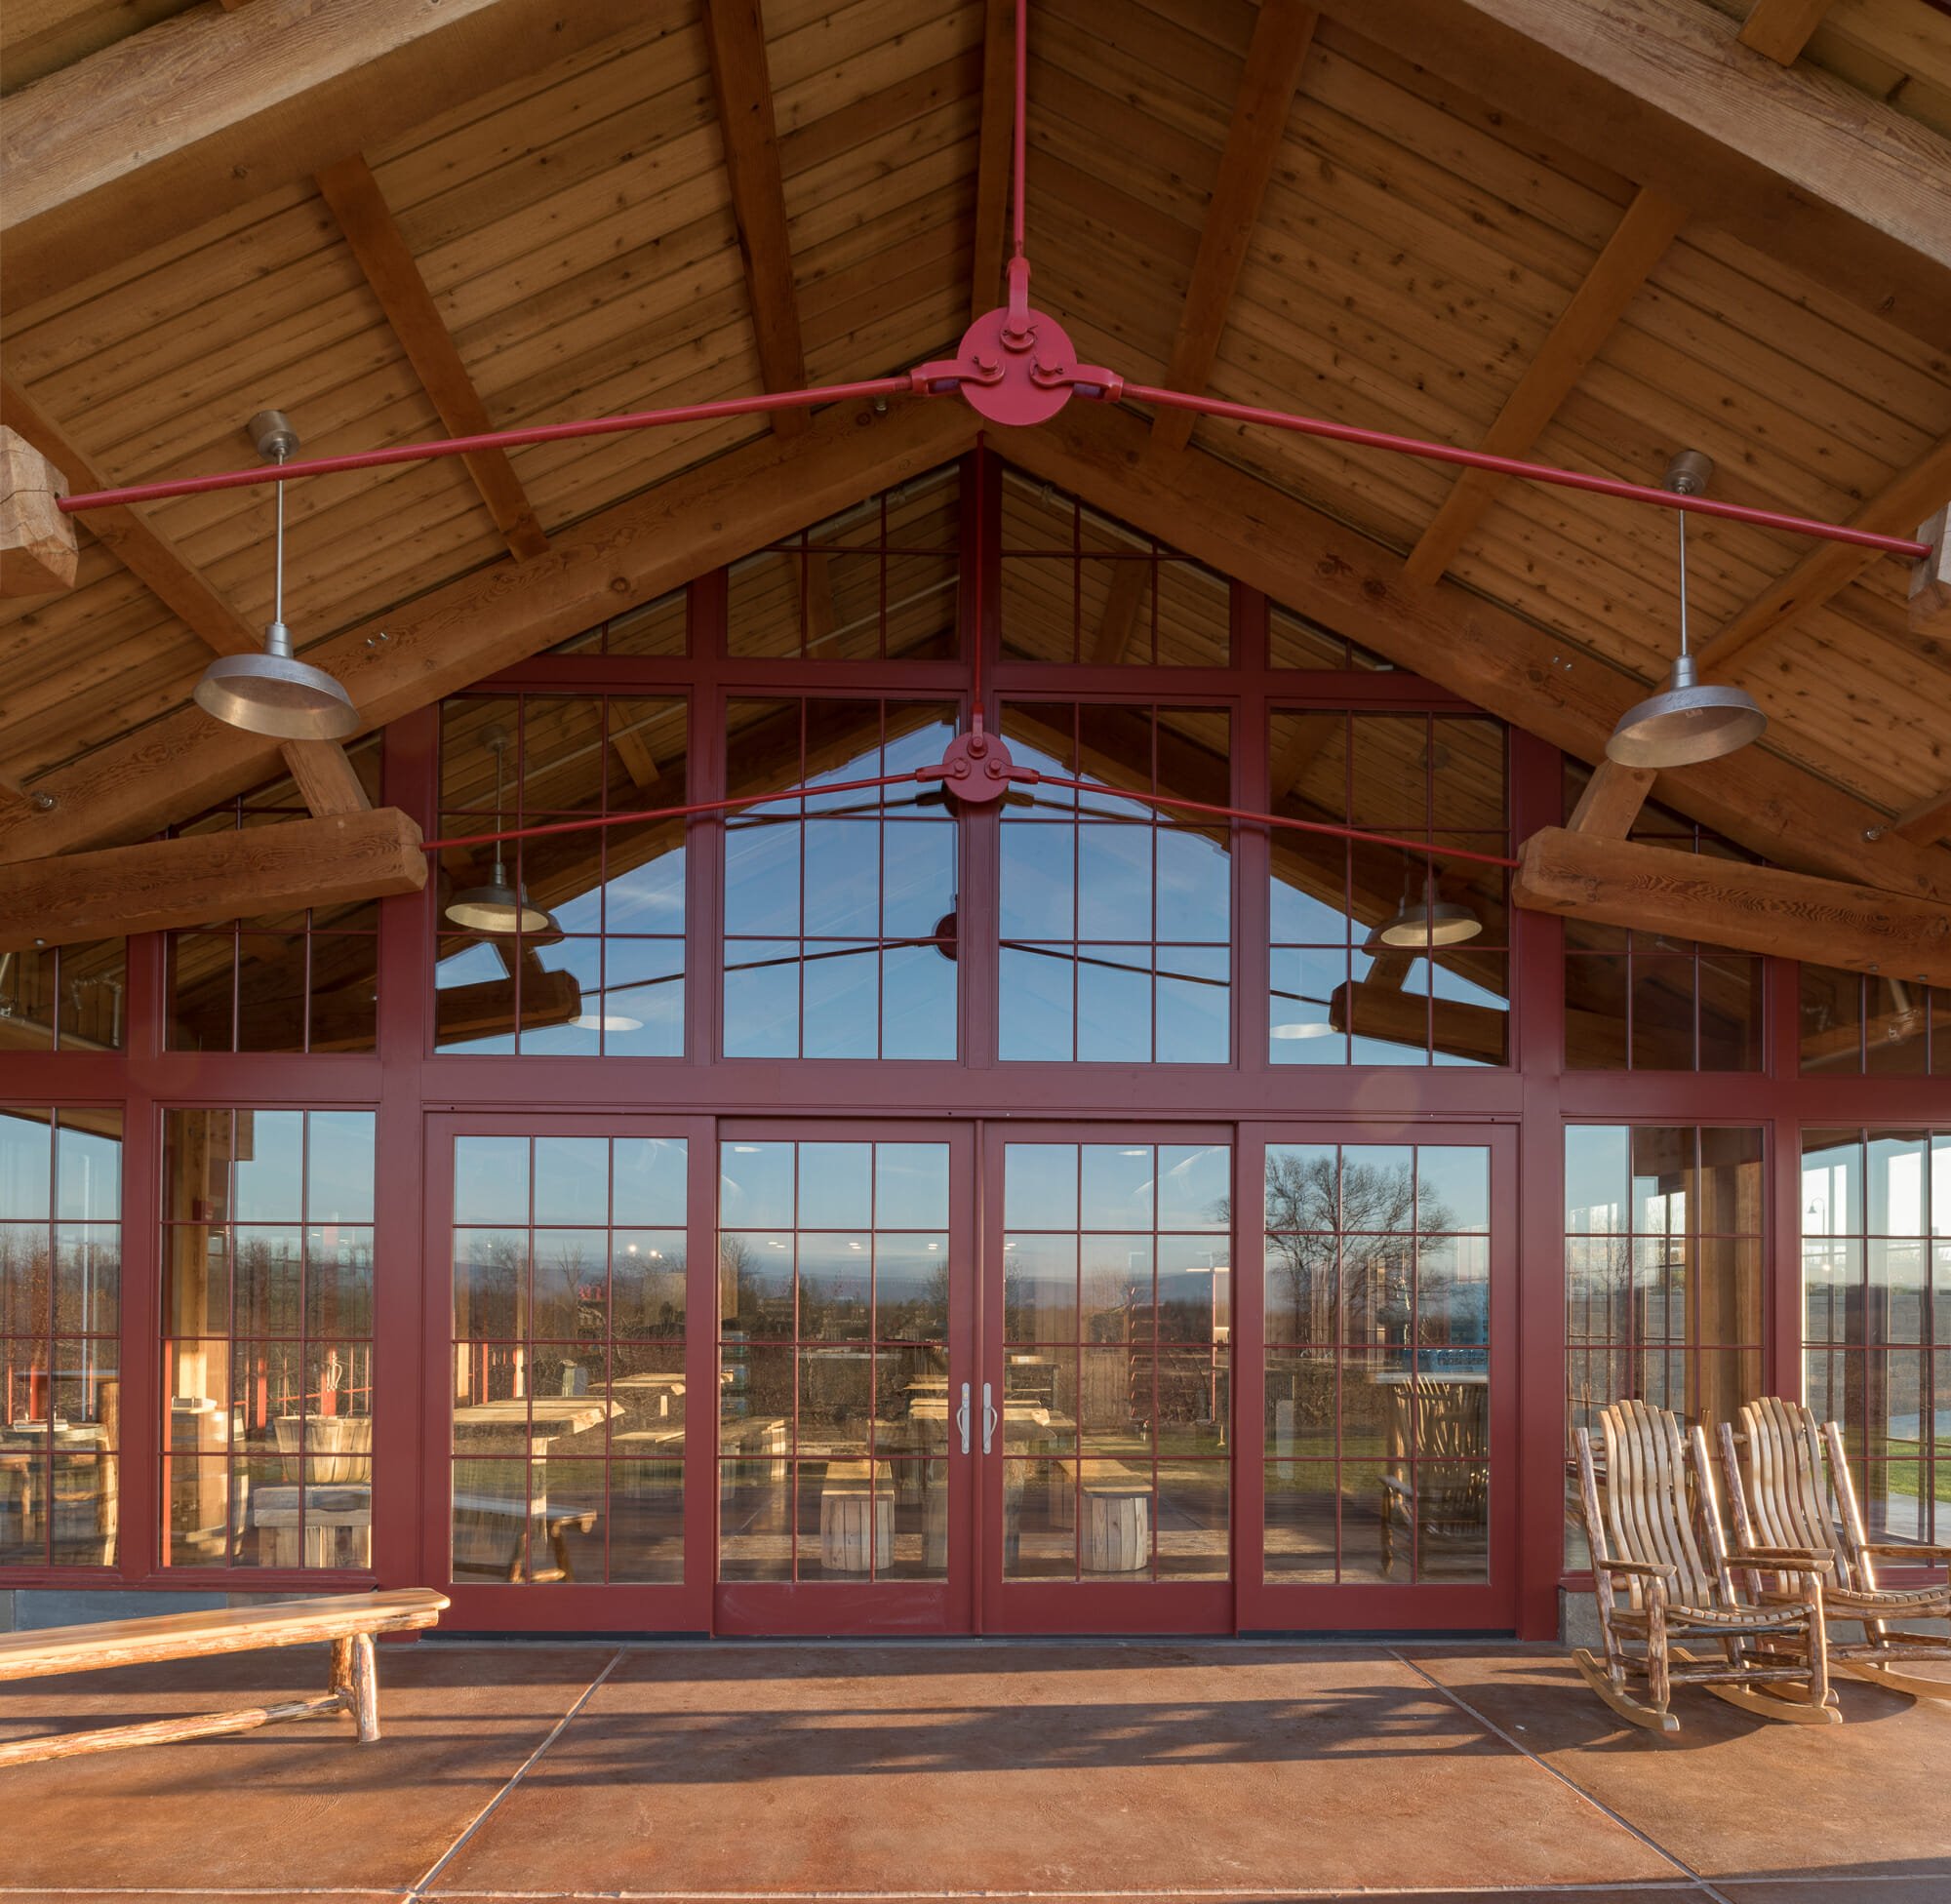 how to incorporate steel in a timber frame - steel tie rod